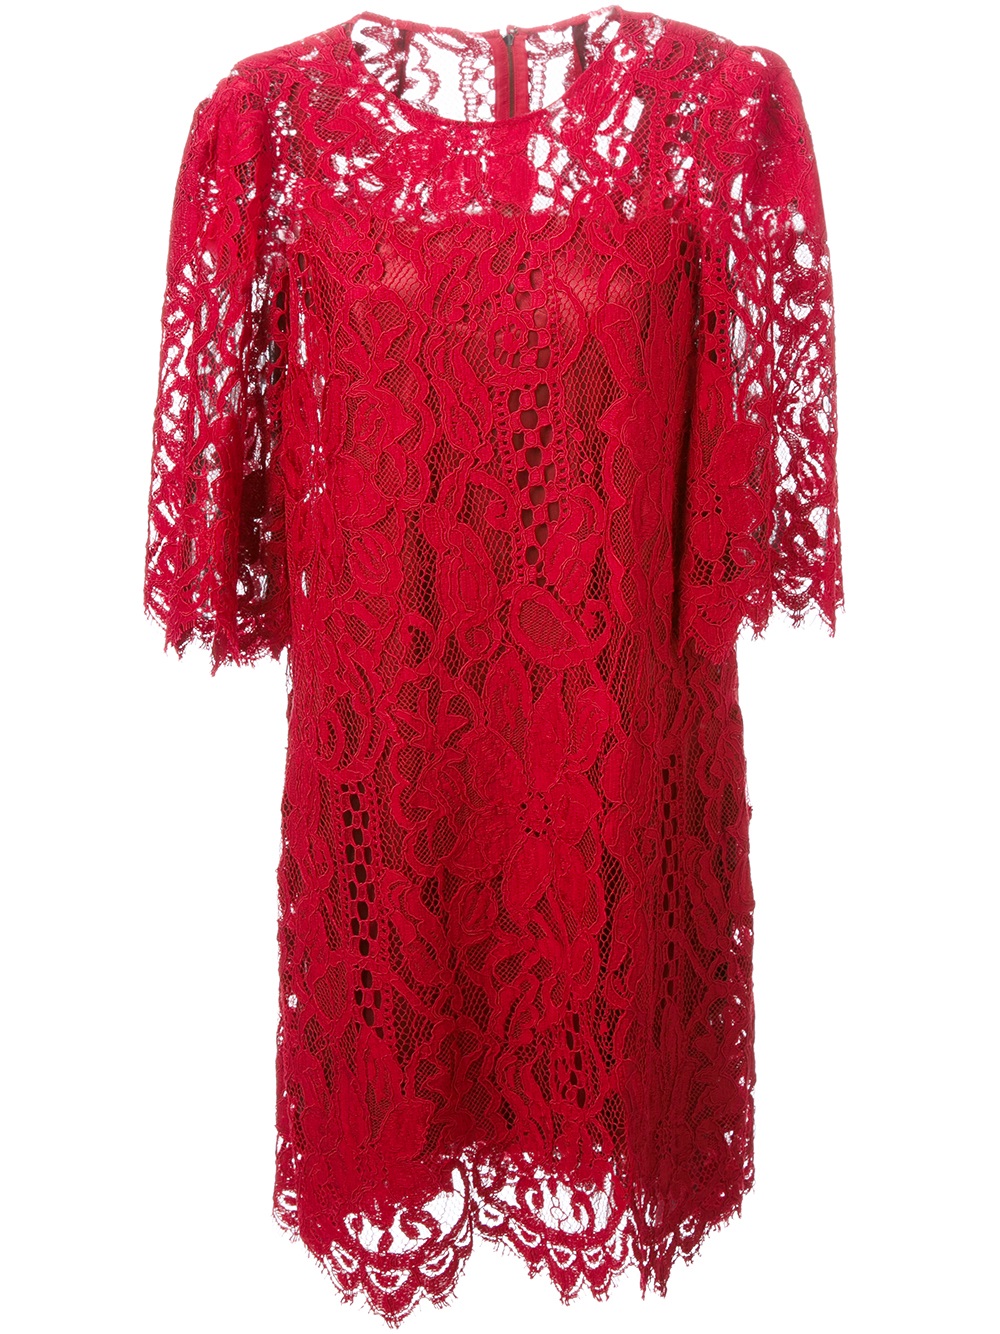 Dolce & Gabbana Lace Dress in Red | Lyst